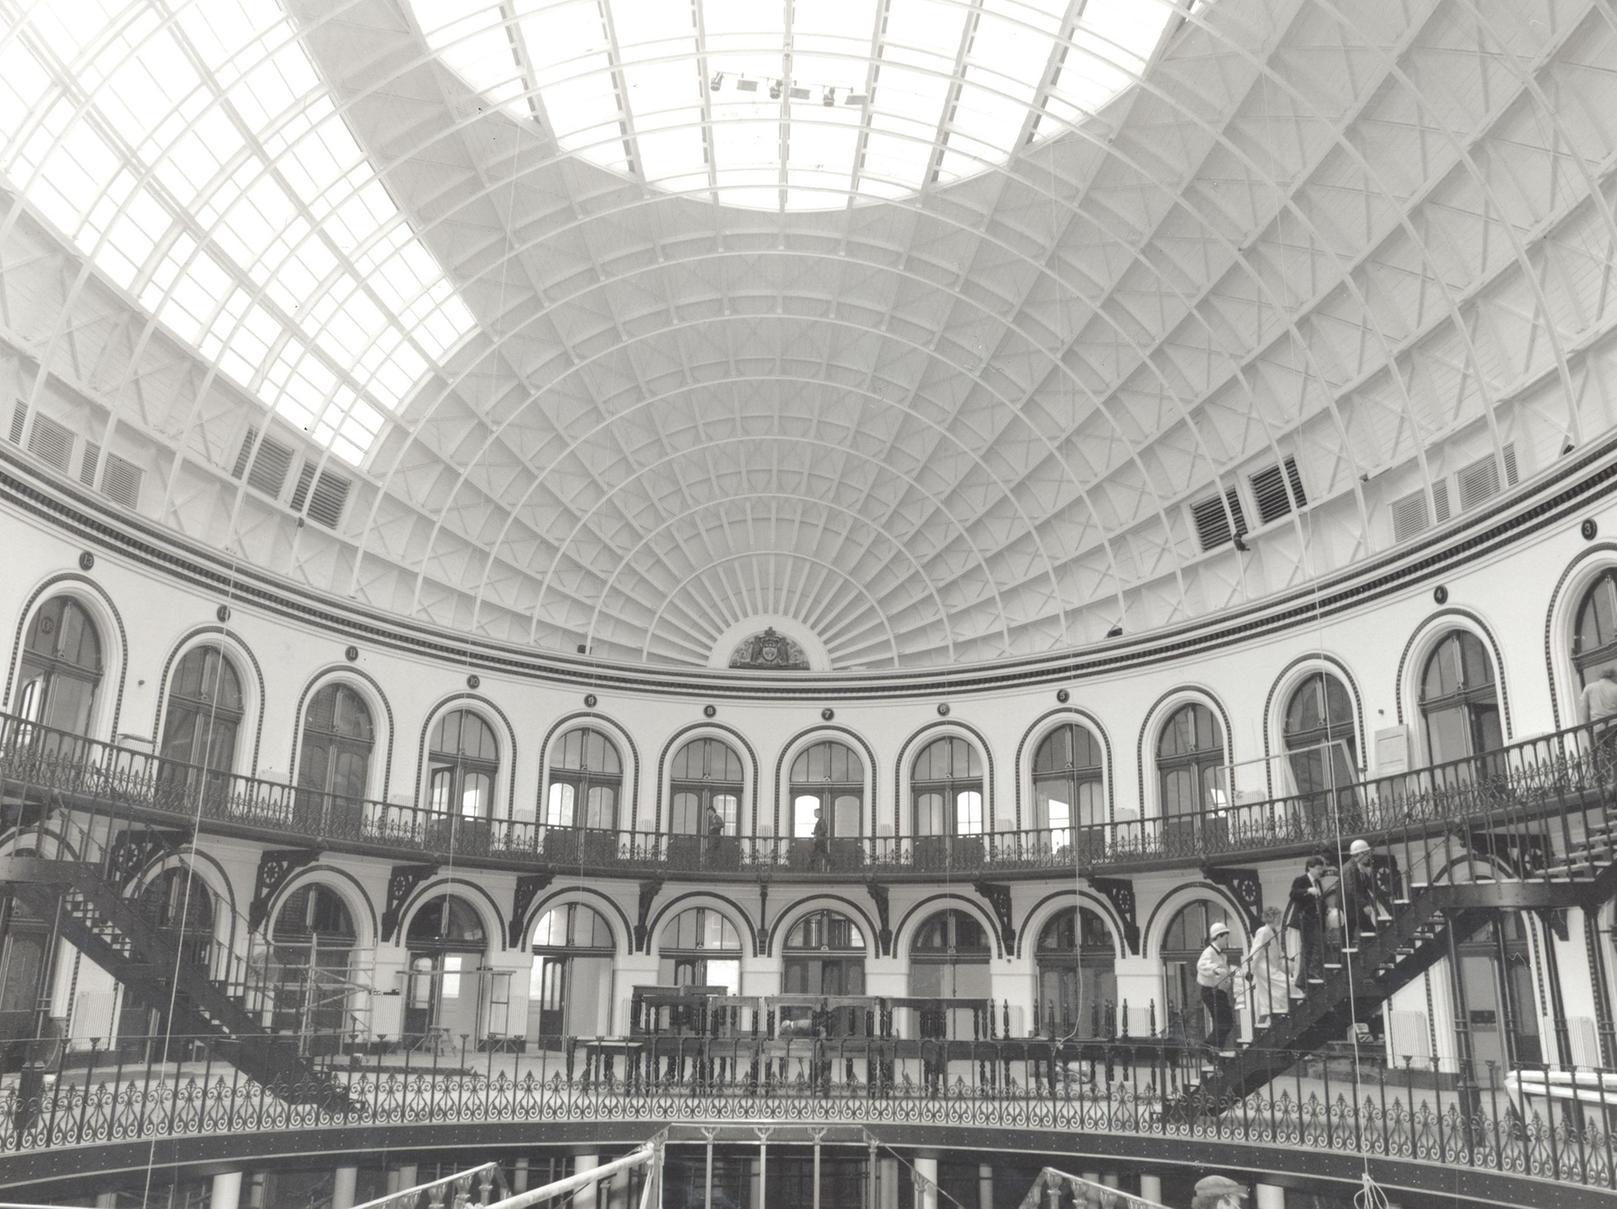 Inside the Corn Exchange during the renovation which involved preserving the past with modern building technology. The multi million pound refurbishment was led by Speciality Shops.